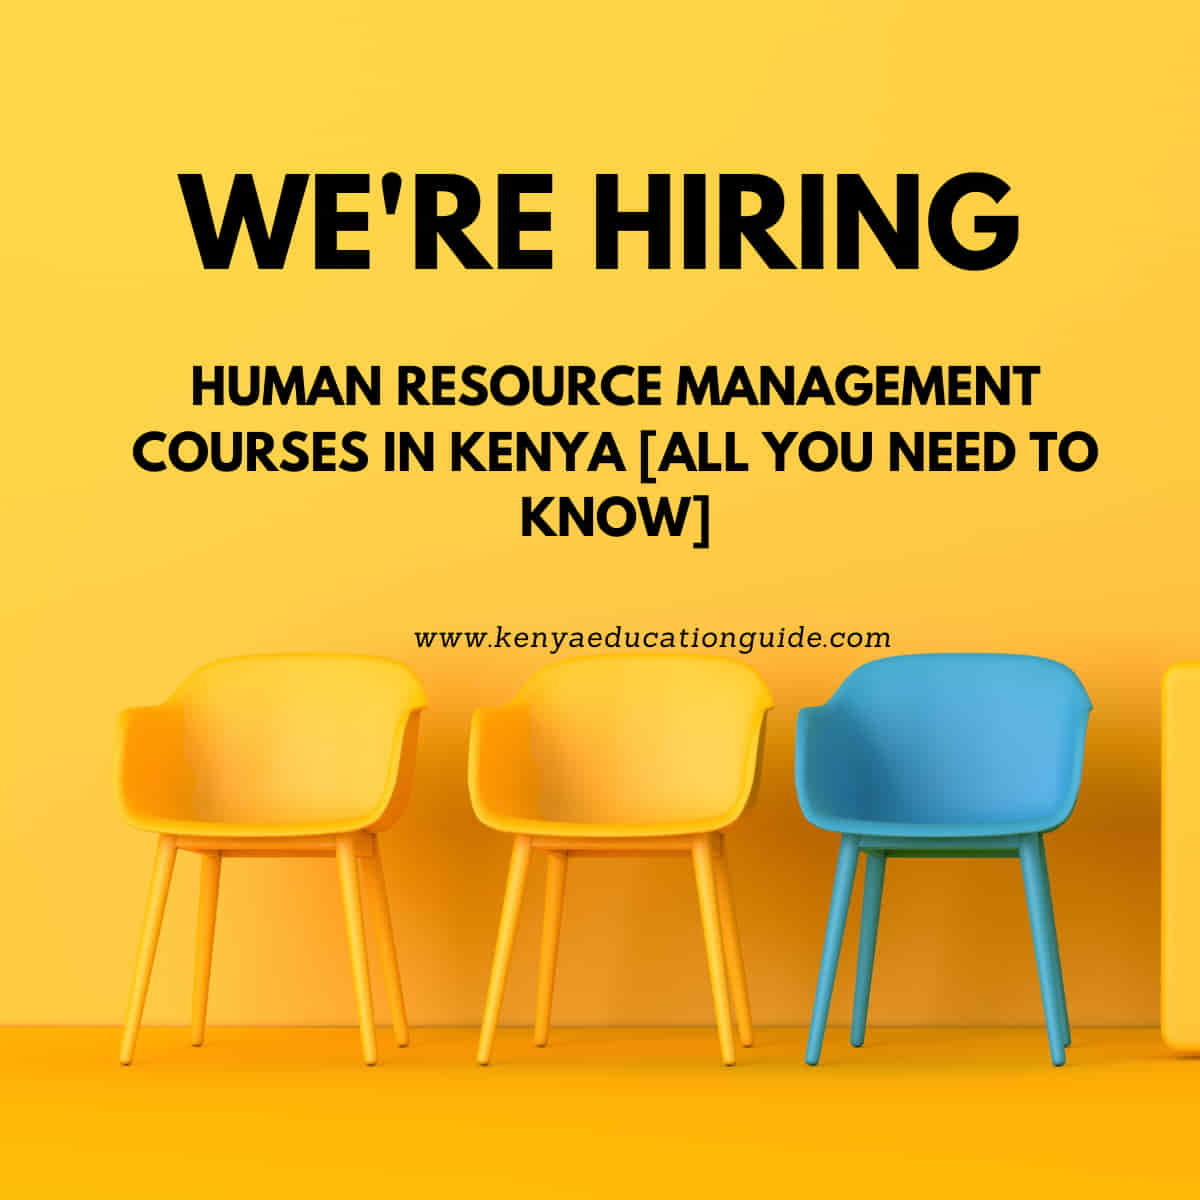 Human resource management courses in Kenya [All you need to know]